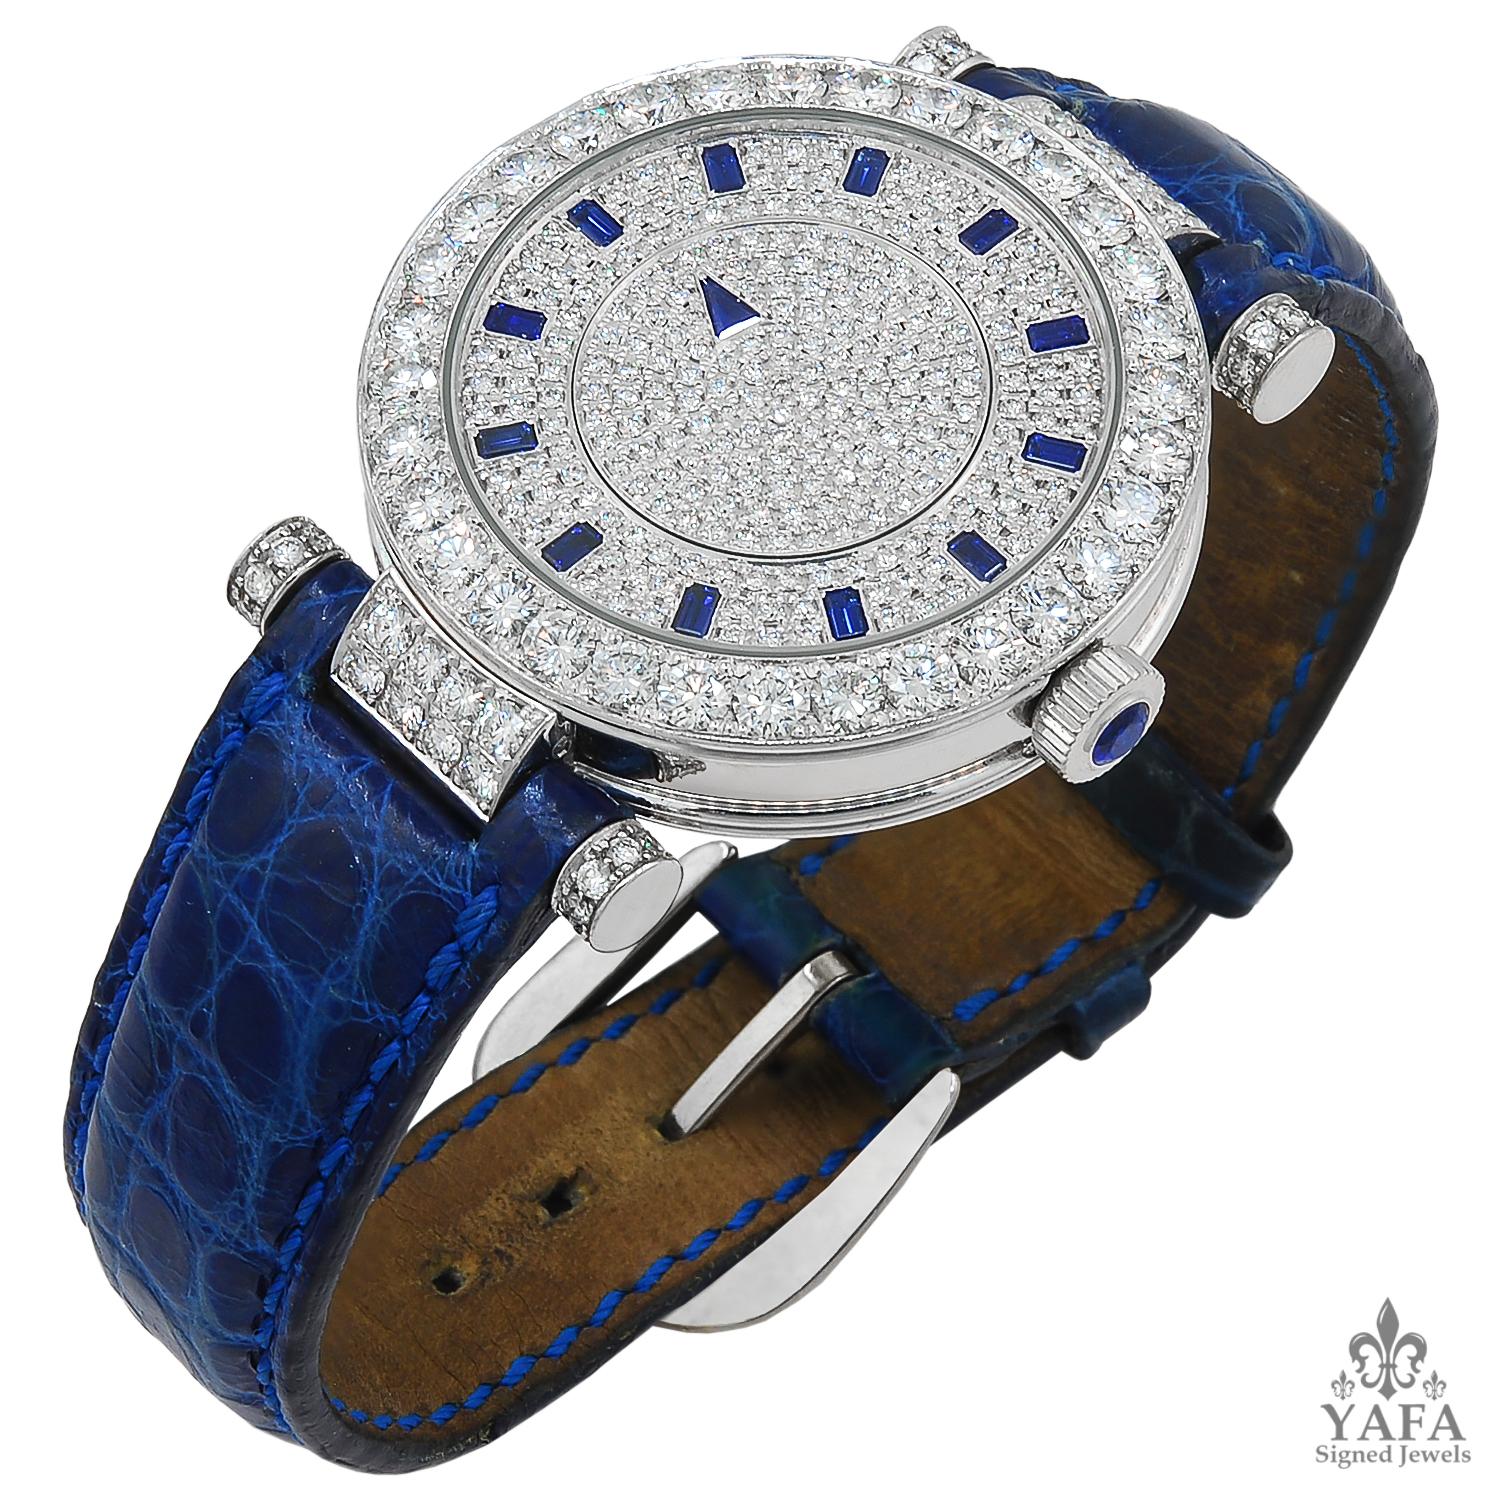 FRANK MULLER Two Tone Diamond, Sapphire Watch
Platinum and 18k gold watch, set with  mystery diamonds and sapphire on blue crocodile strap.
dimensions approx. 8″ in length by 1.30″ in width
accompanied with original certificate
Signed “FRANK